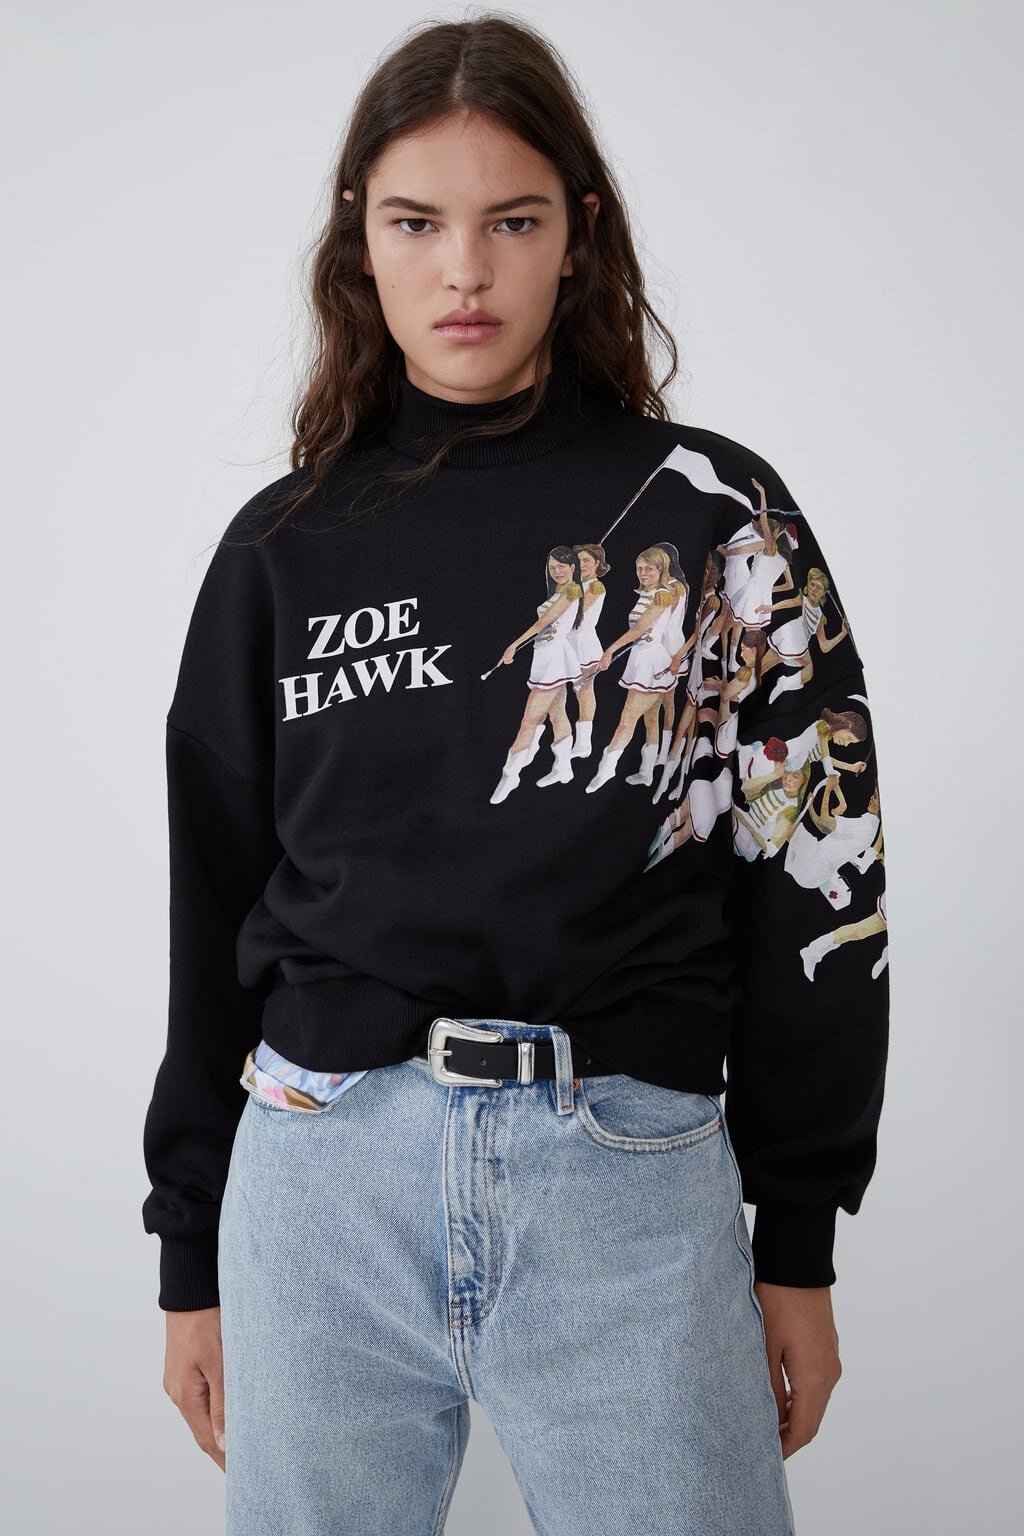 Zoe Hawk Collaborates with ZARA for their Women in Art Collection ...